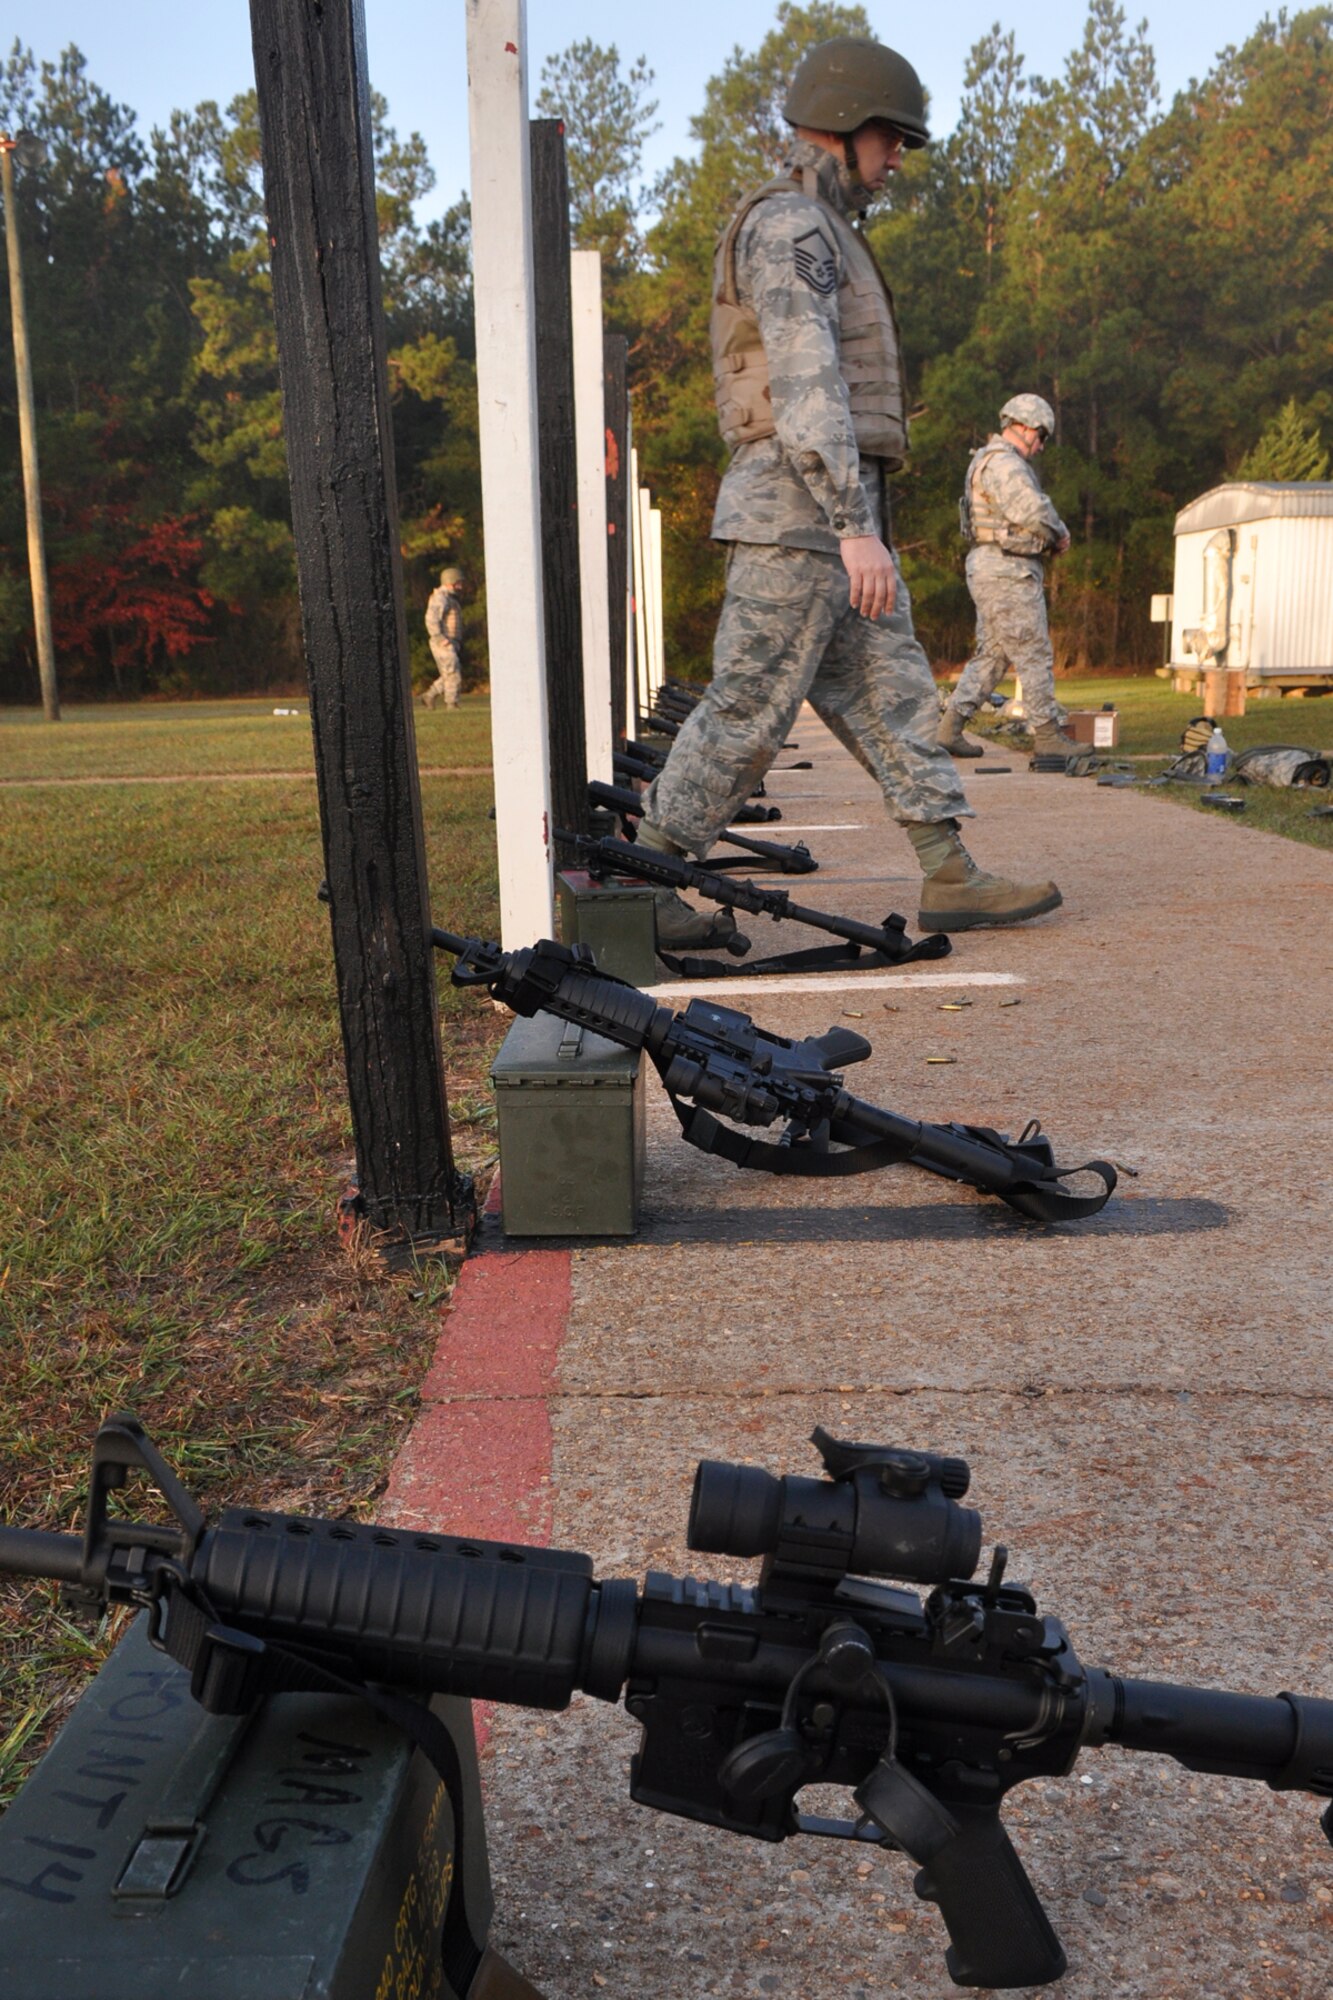 Airmen from the 307th Civil Engineer Squadron return to the firing line after checking their targets at a range near Barksdale Air Force Base, La., Nov. 3, 2012. (U.S. Air Force photo by Master Sgt. Jeff Walston/Released) 